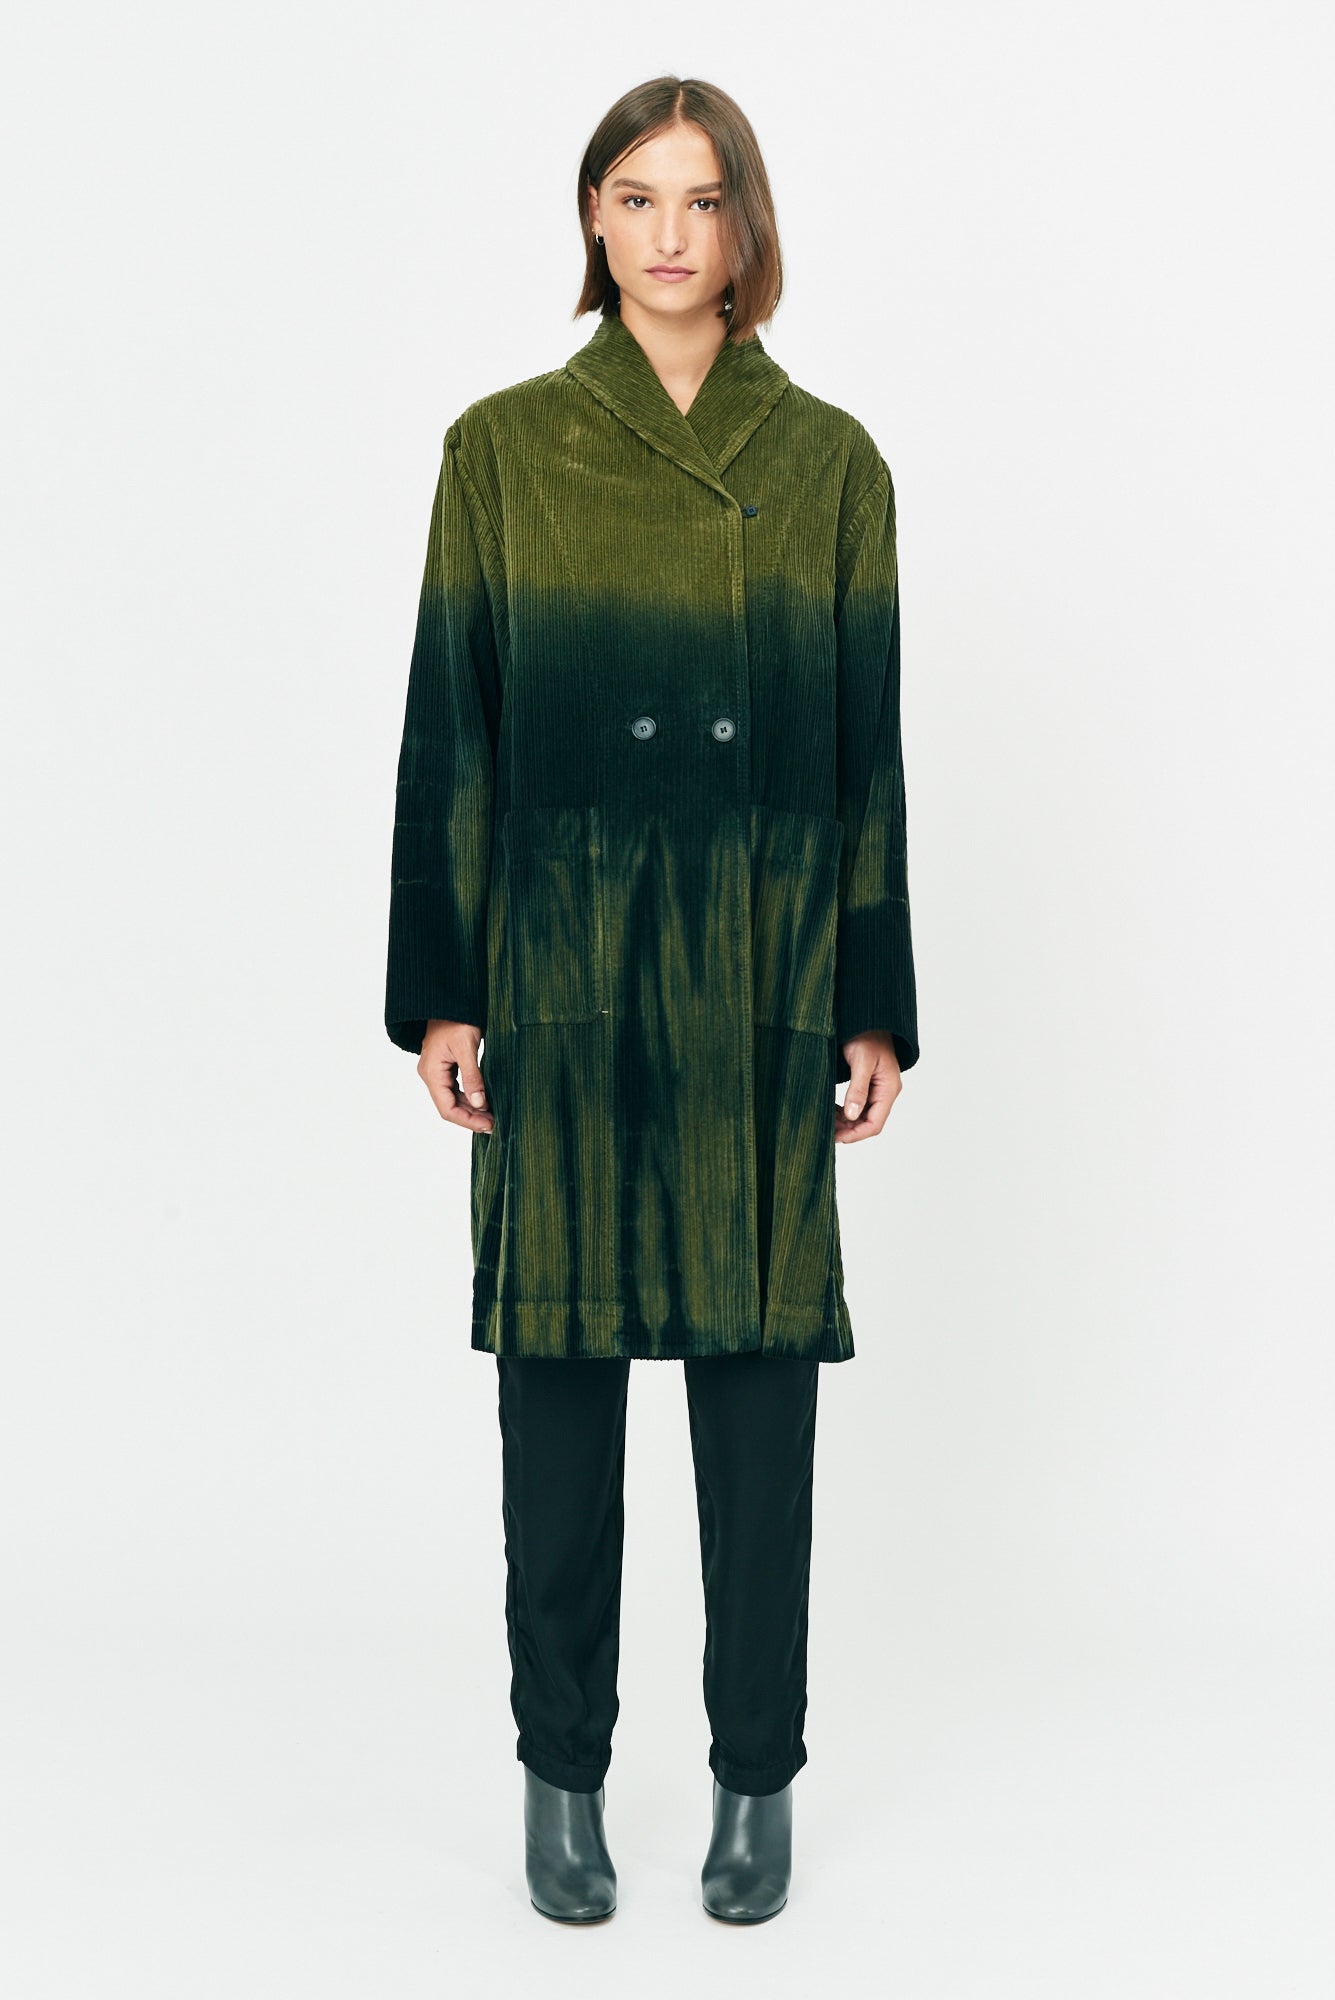 Forest Electric Gradient Rancho Corduroy Swing Coat